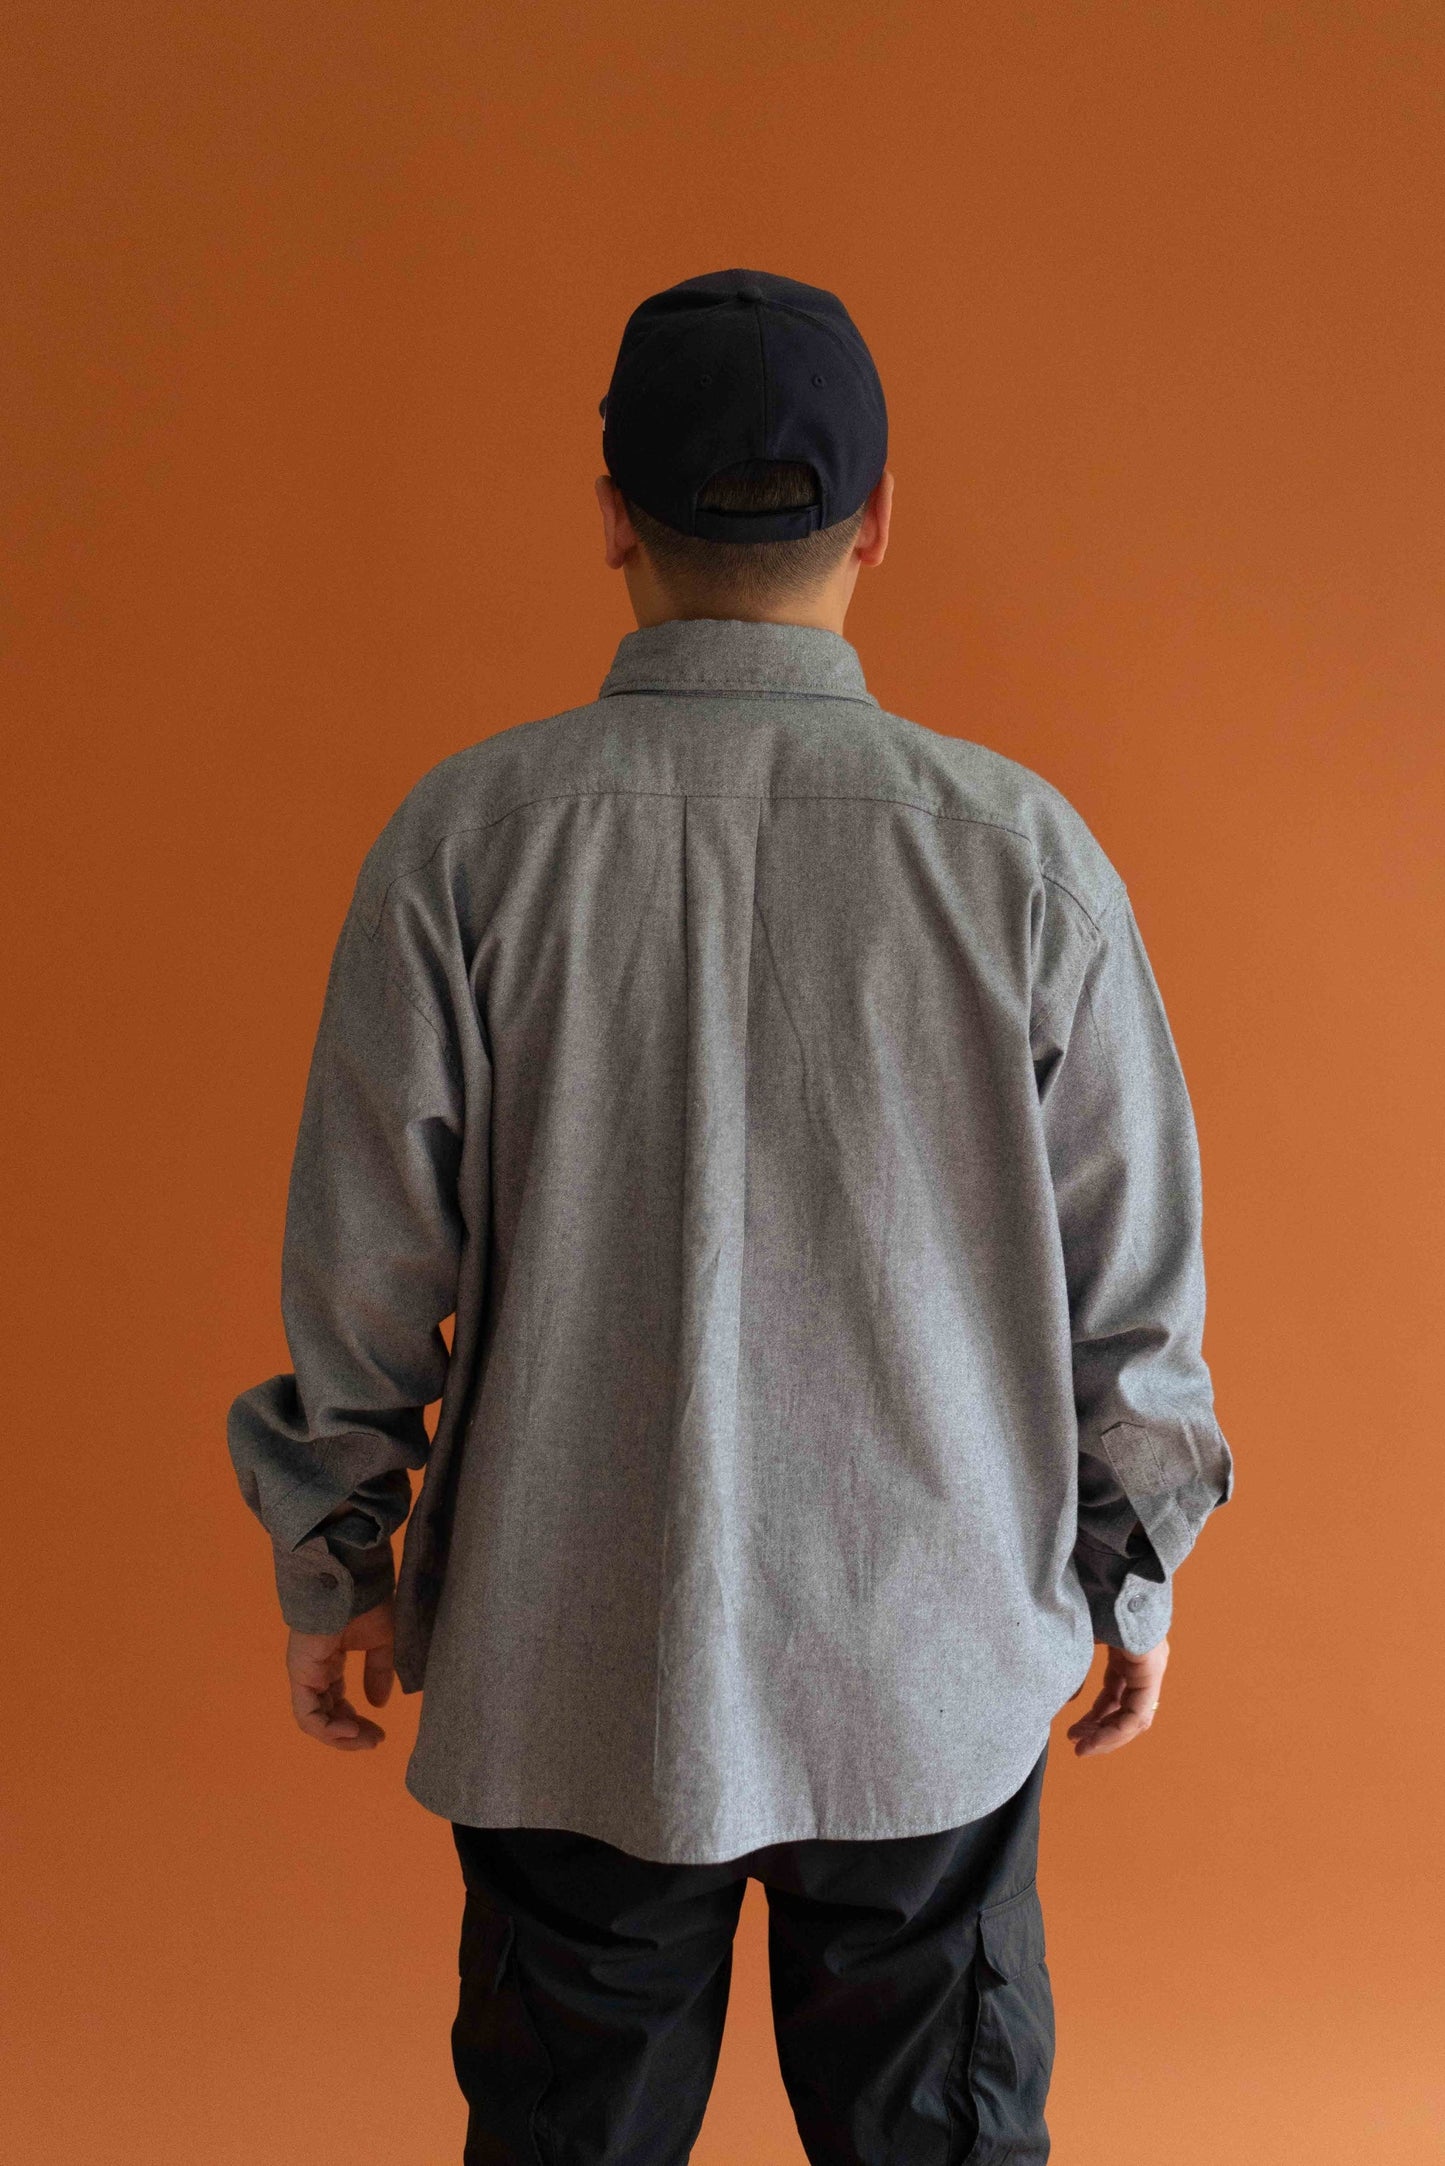 DEFECT 15% - ETERNELLE SHIRT FOR HIM IN LIMESTONE